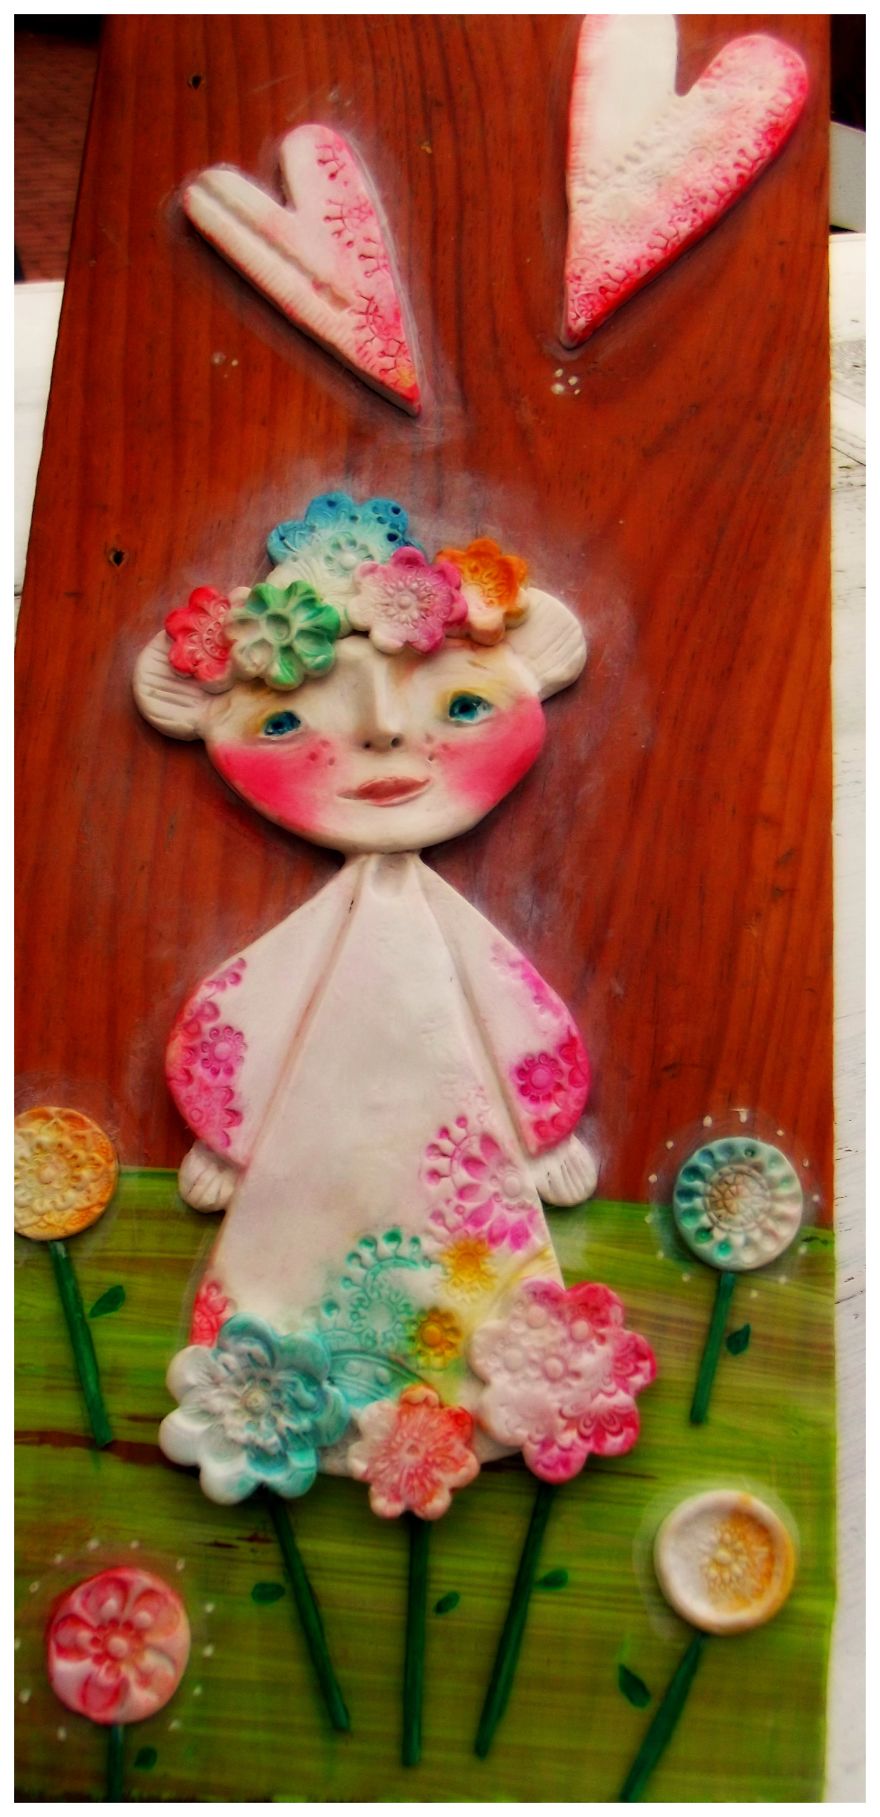 I Create Whimsical Art Out Of Air Dry Clay, Paper, And Water Color Paint